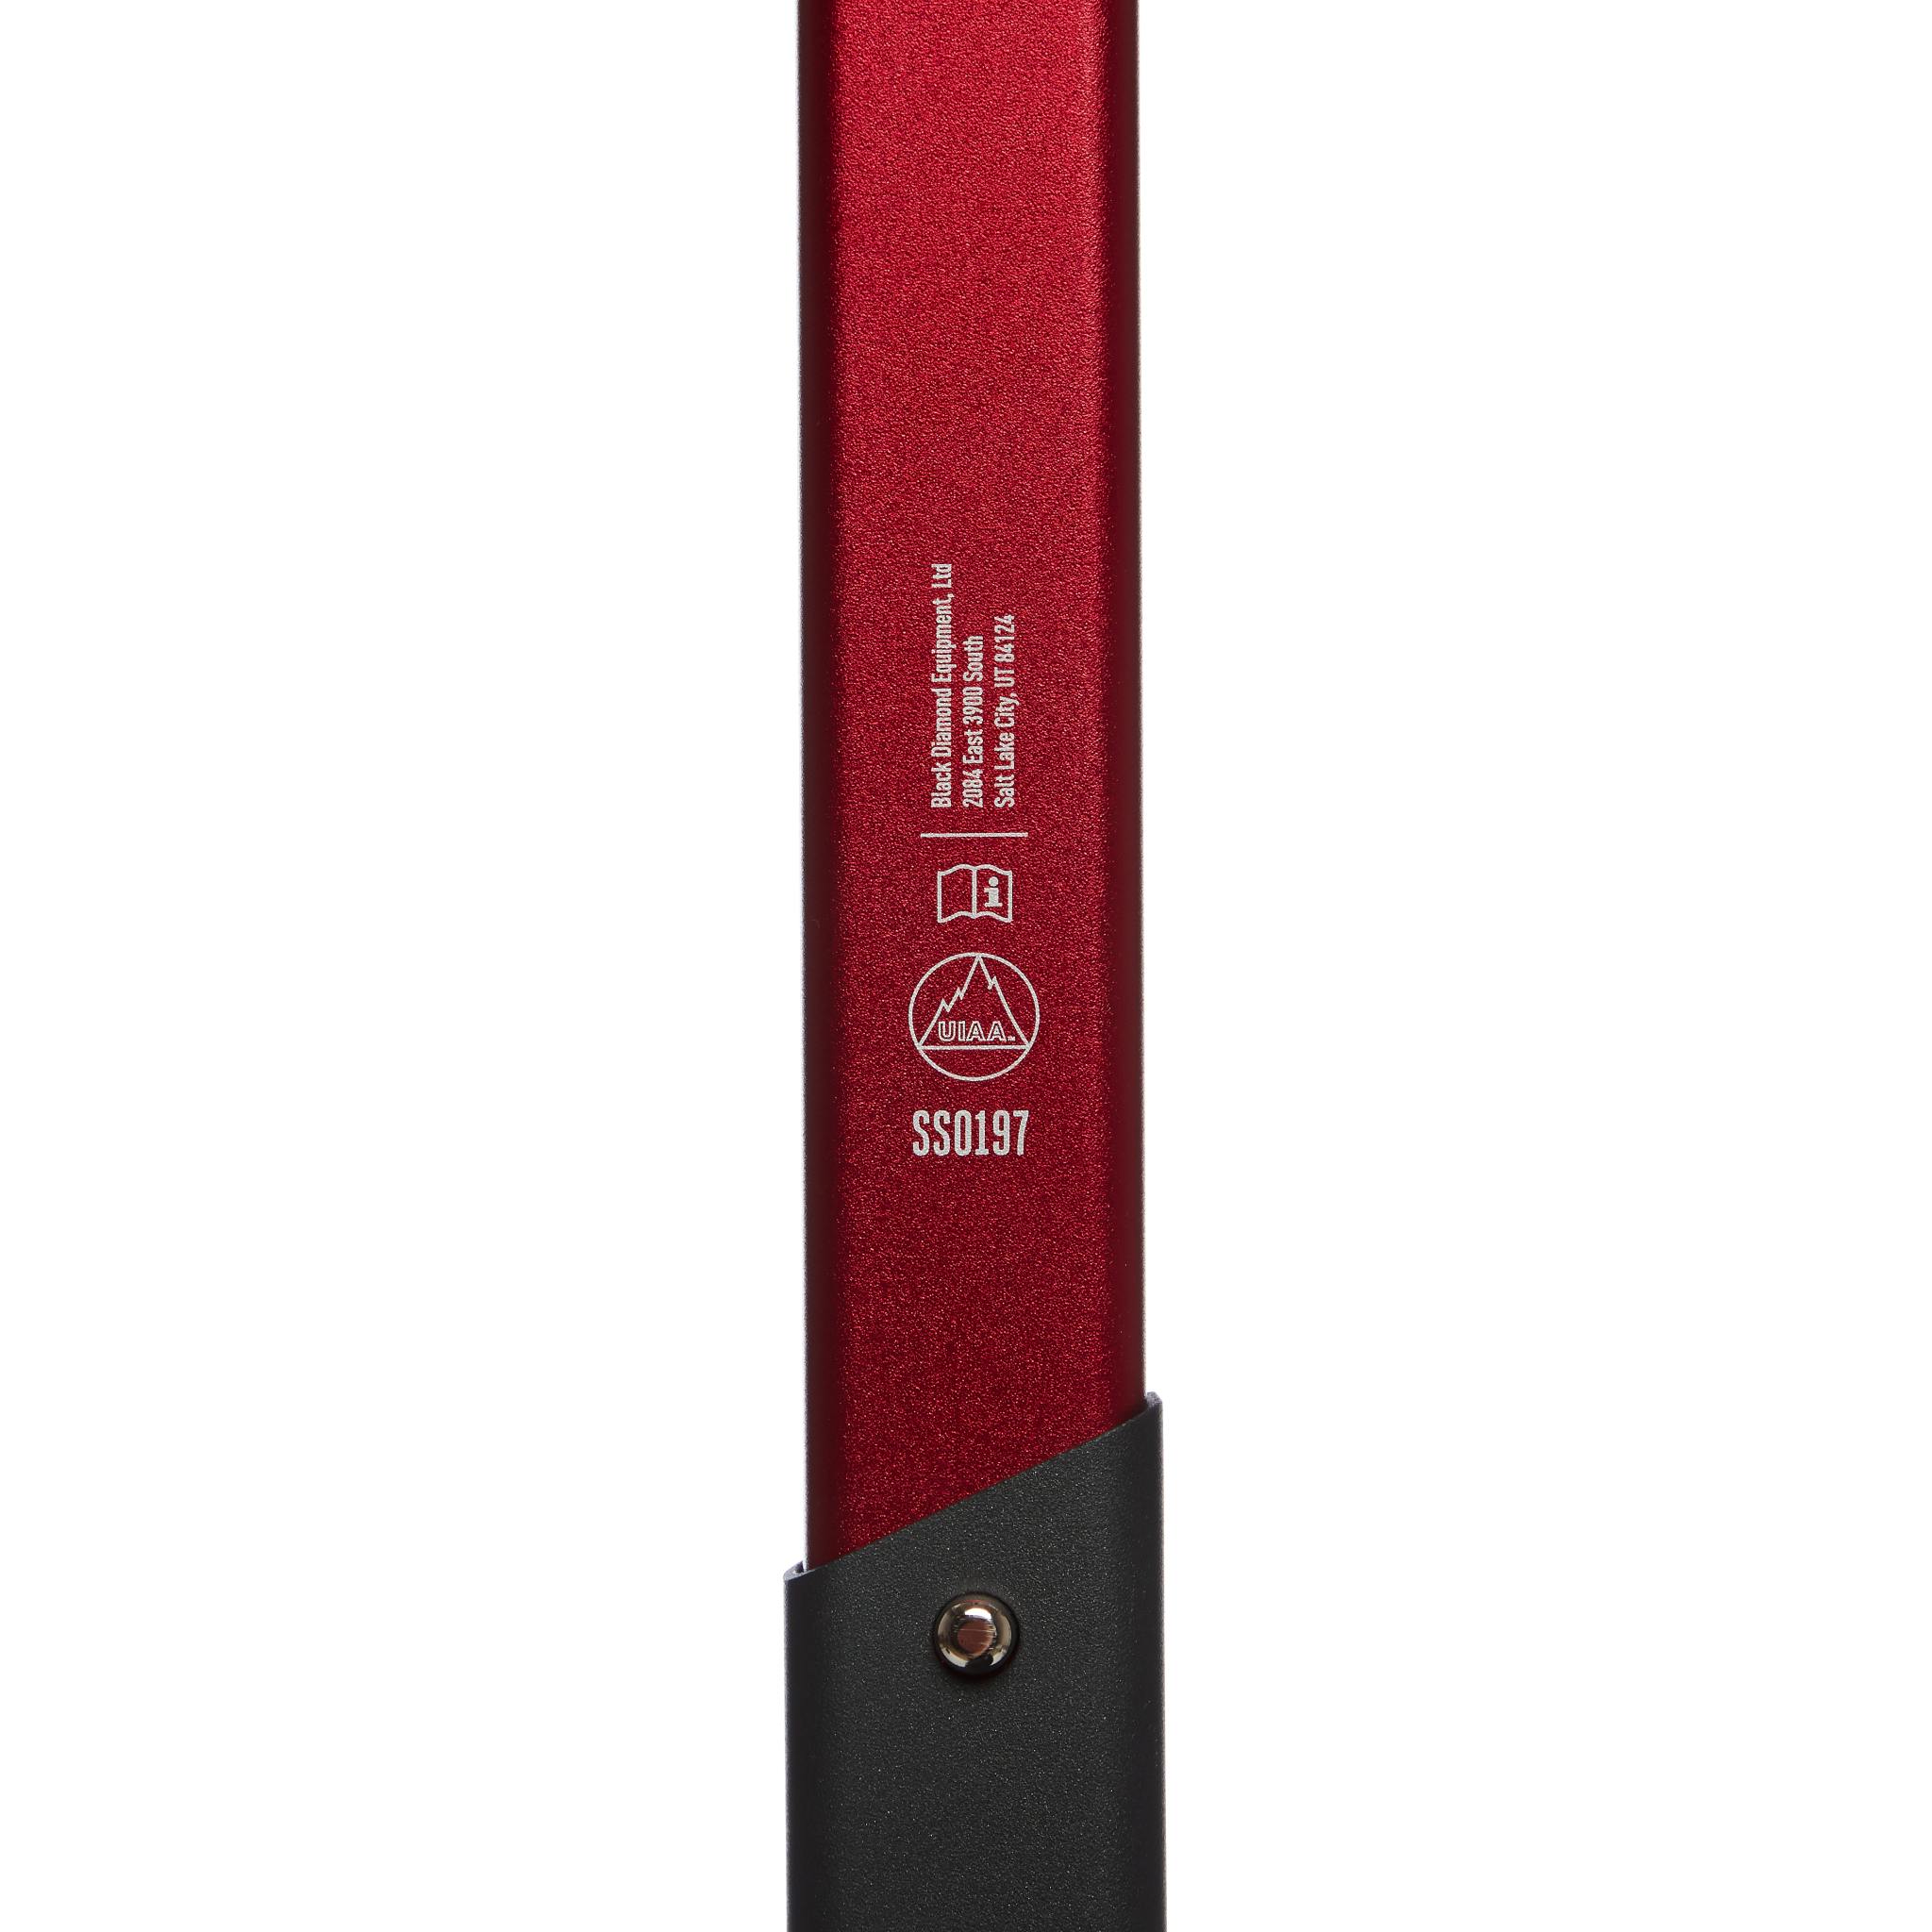 Shaft of Transfer shovel showing the UIAA certification logo